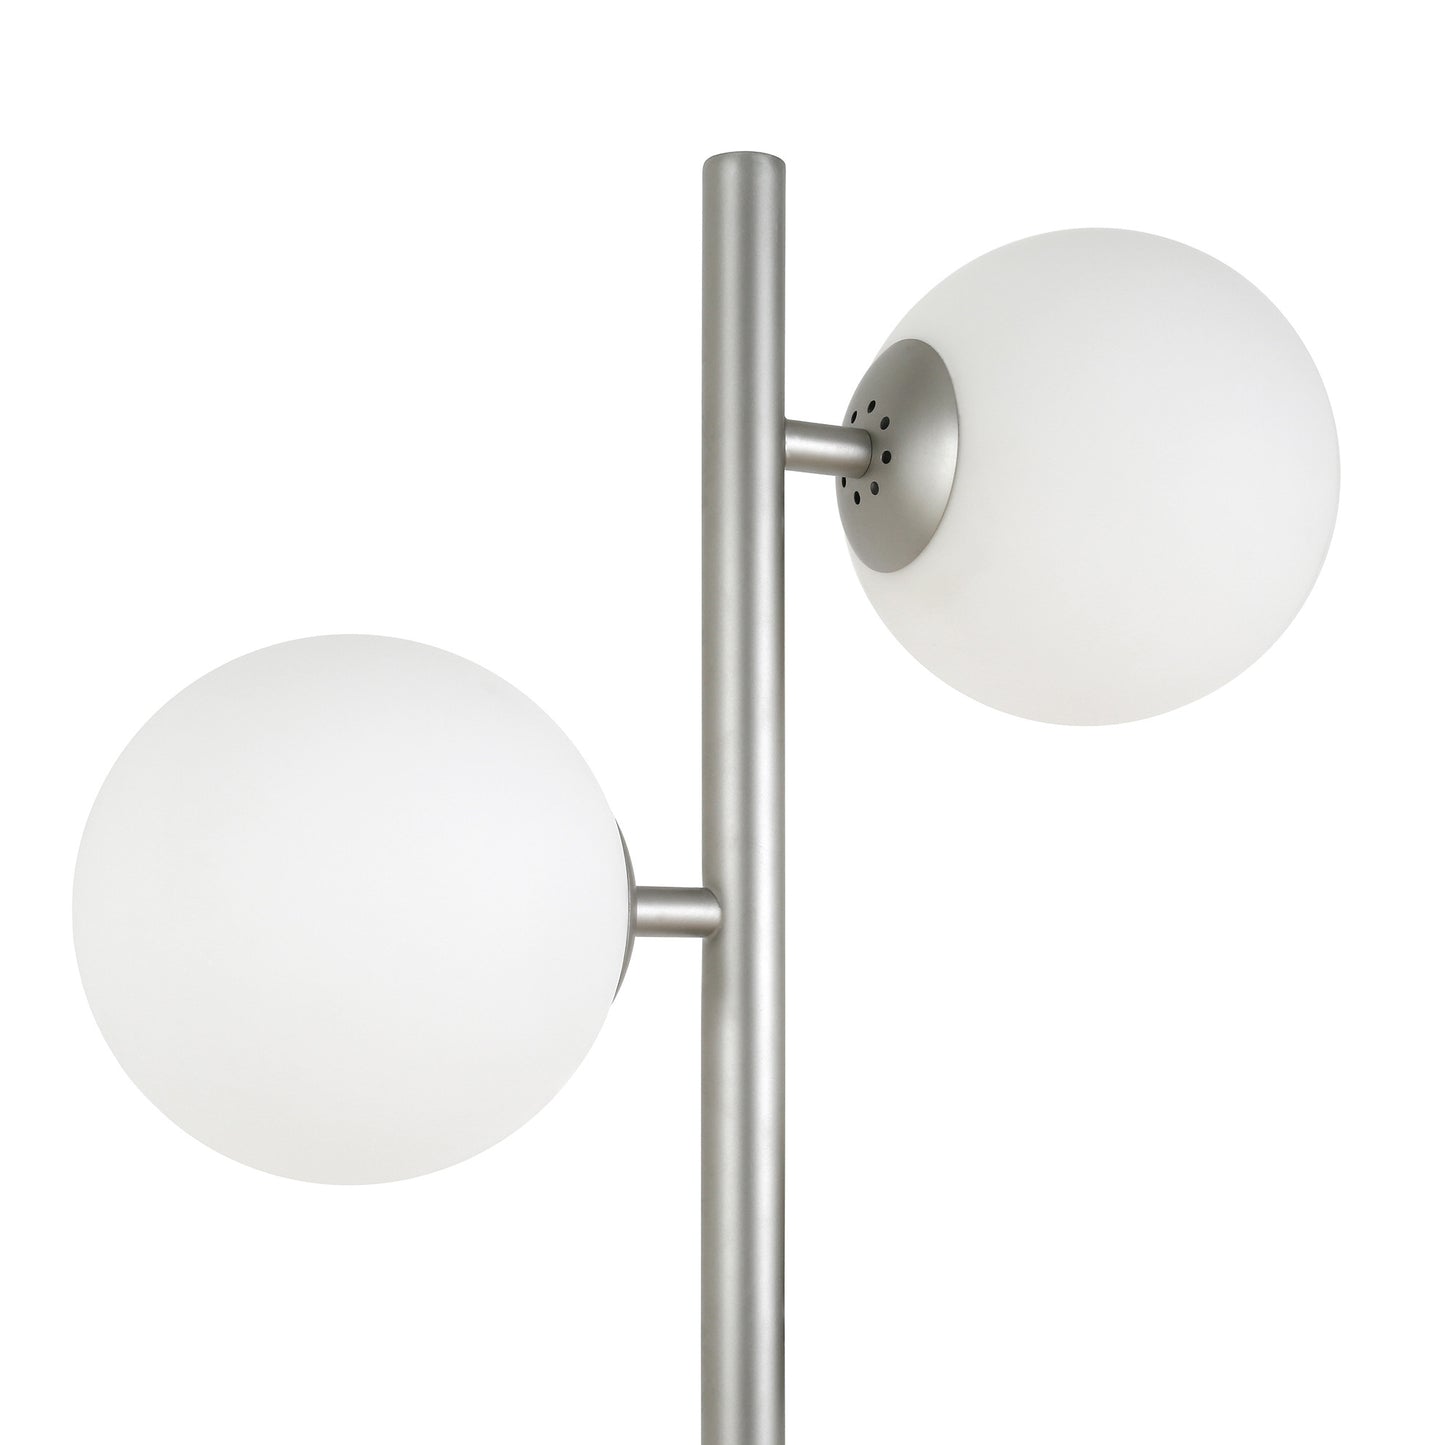 70" Nickel Two Light Tree Floor Lamp With White Frosted Glass Globe Shade